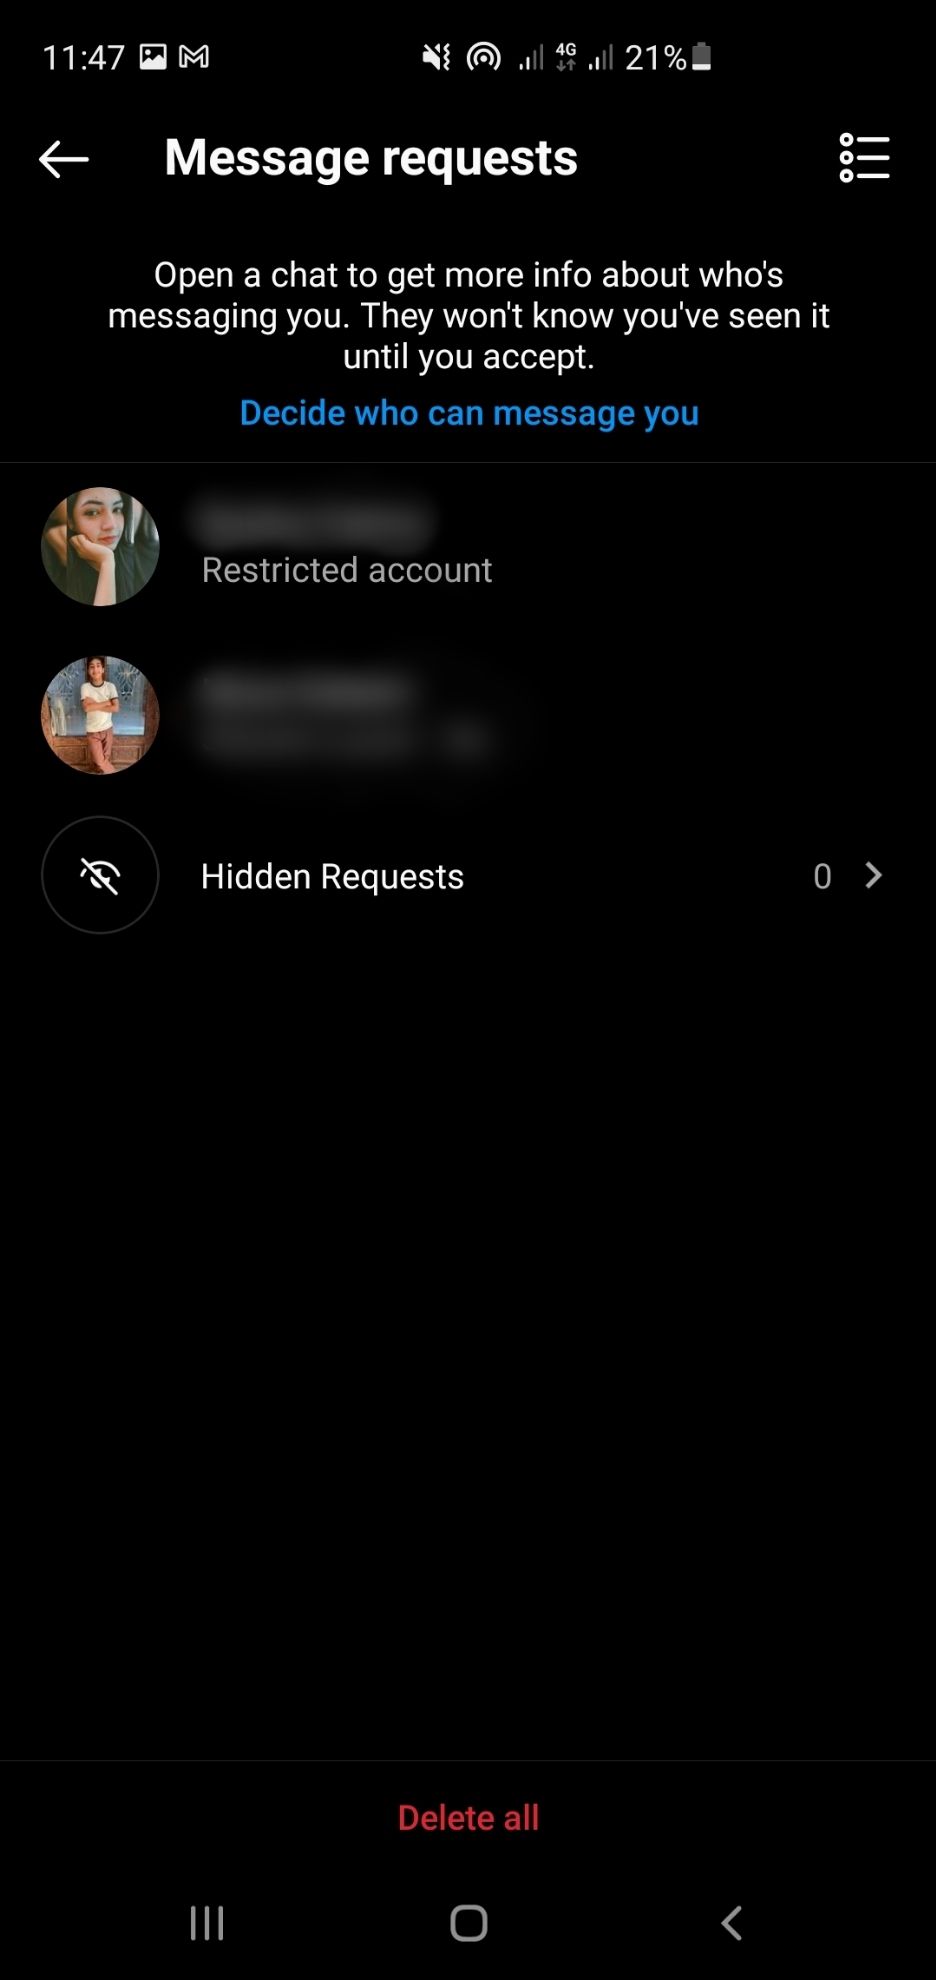 Account gone in Message Requests